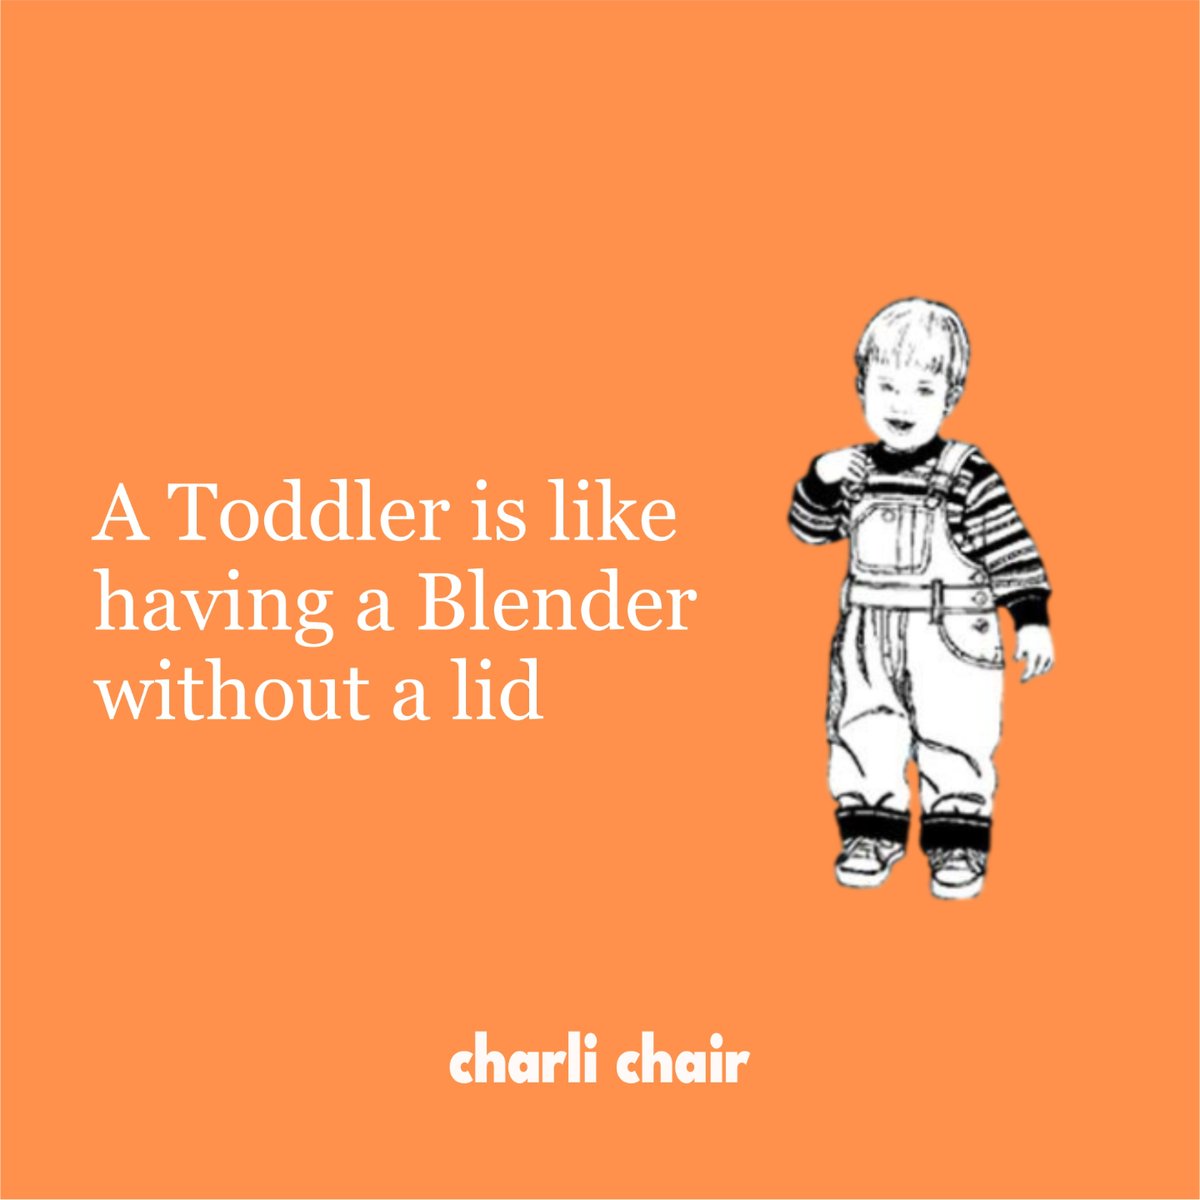 Life with a toddler is just like having a blender without a lid: unpredictable, messy, but oh so much fun! 😄👶
.
.
#BedtimeHumor
#SleepyKids